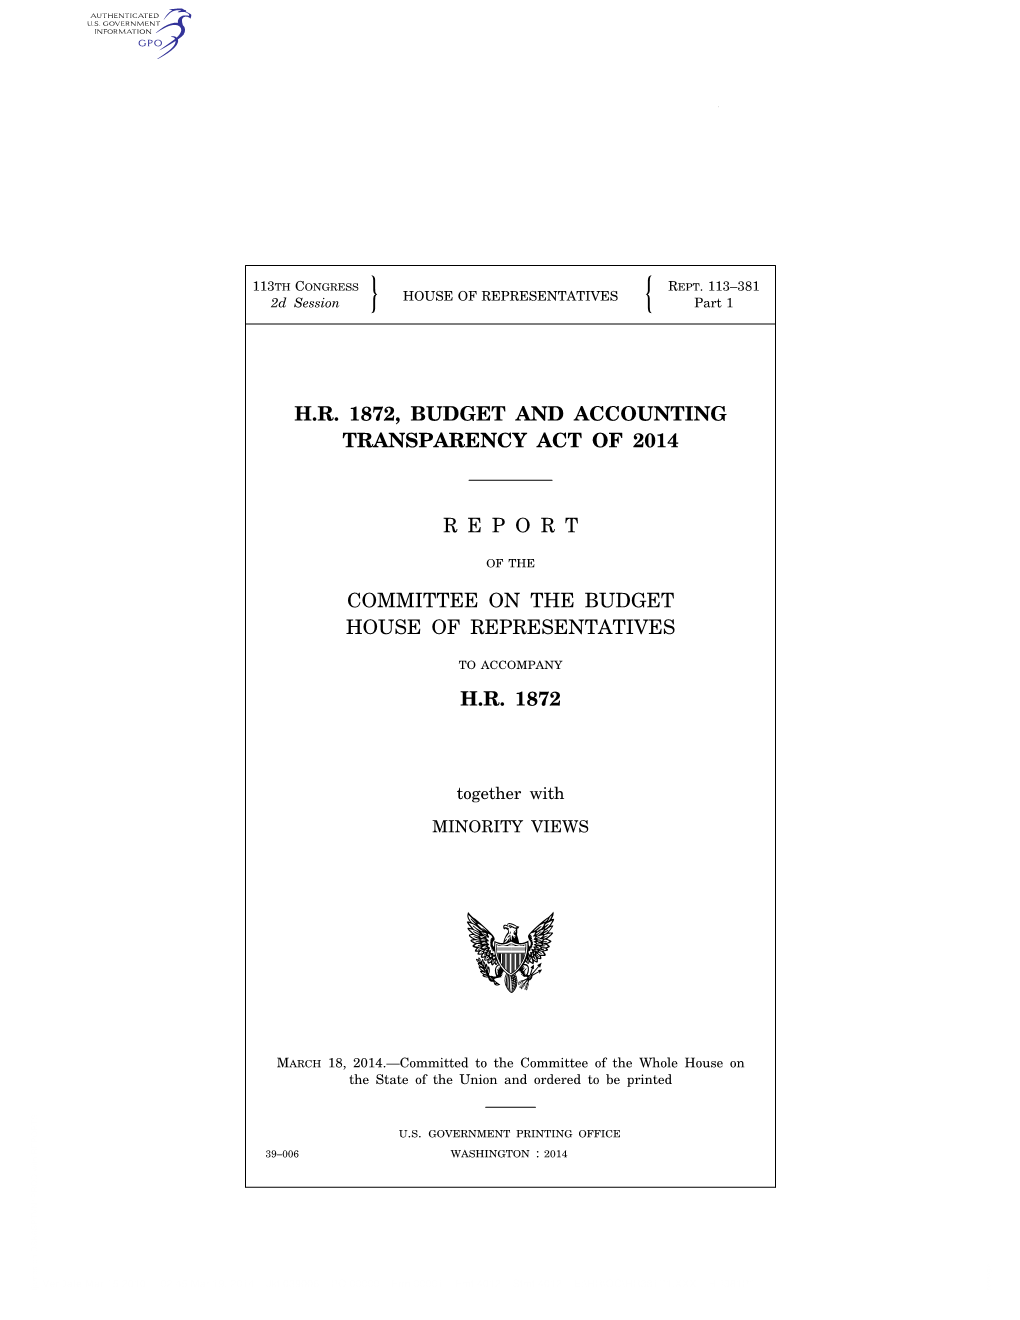 H.R. 1872, Budget and Accounting Transparency Act of 2014